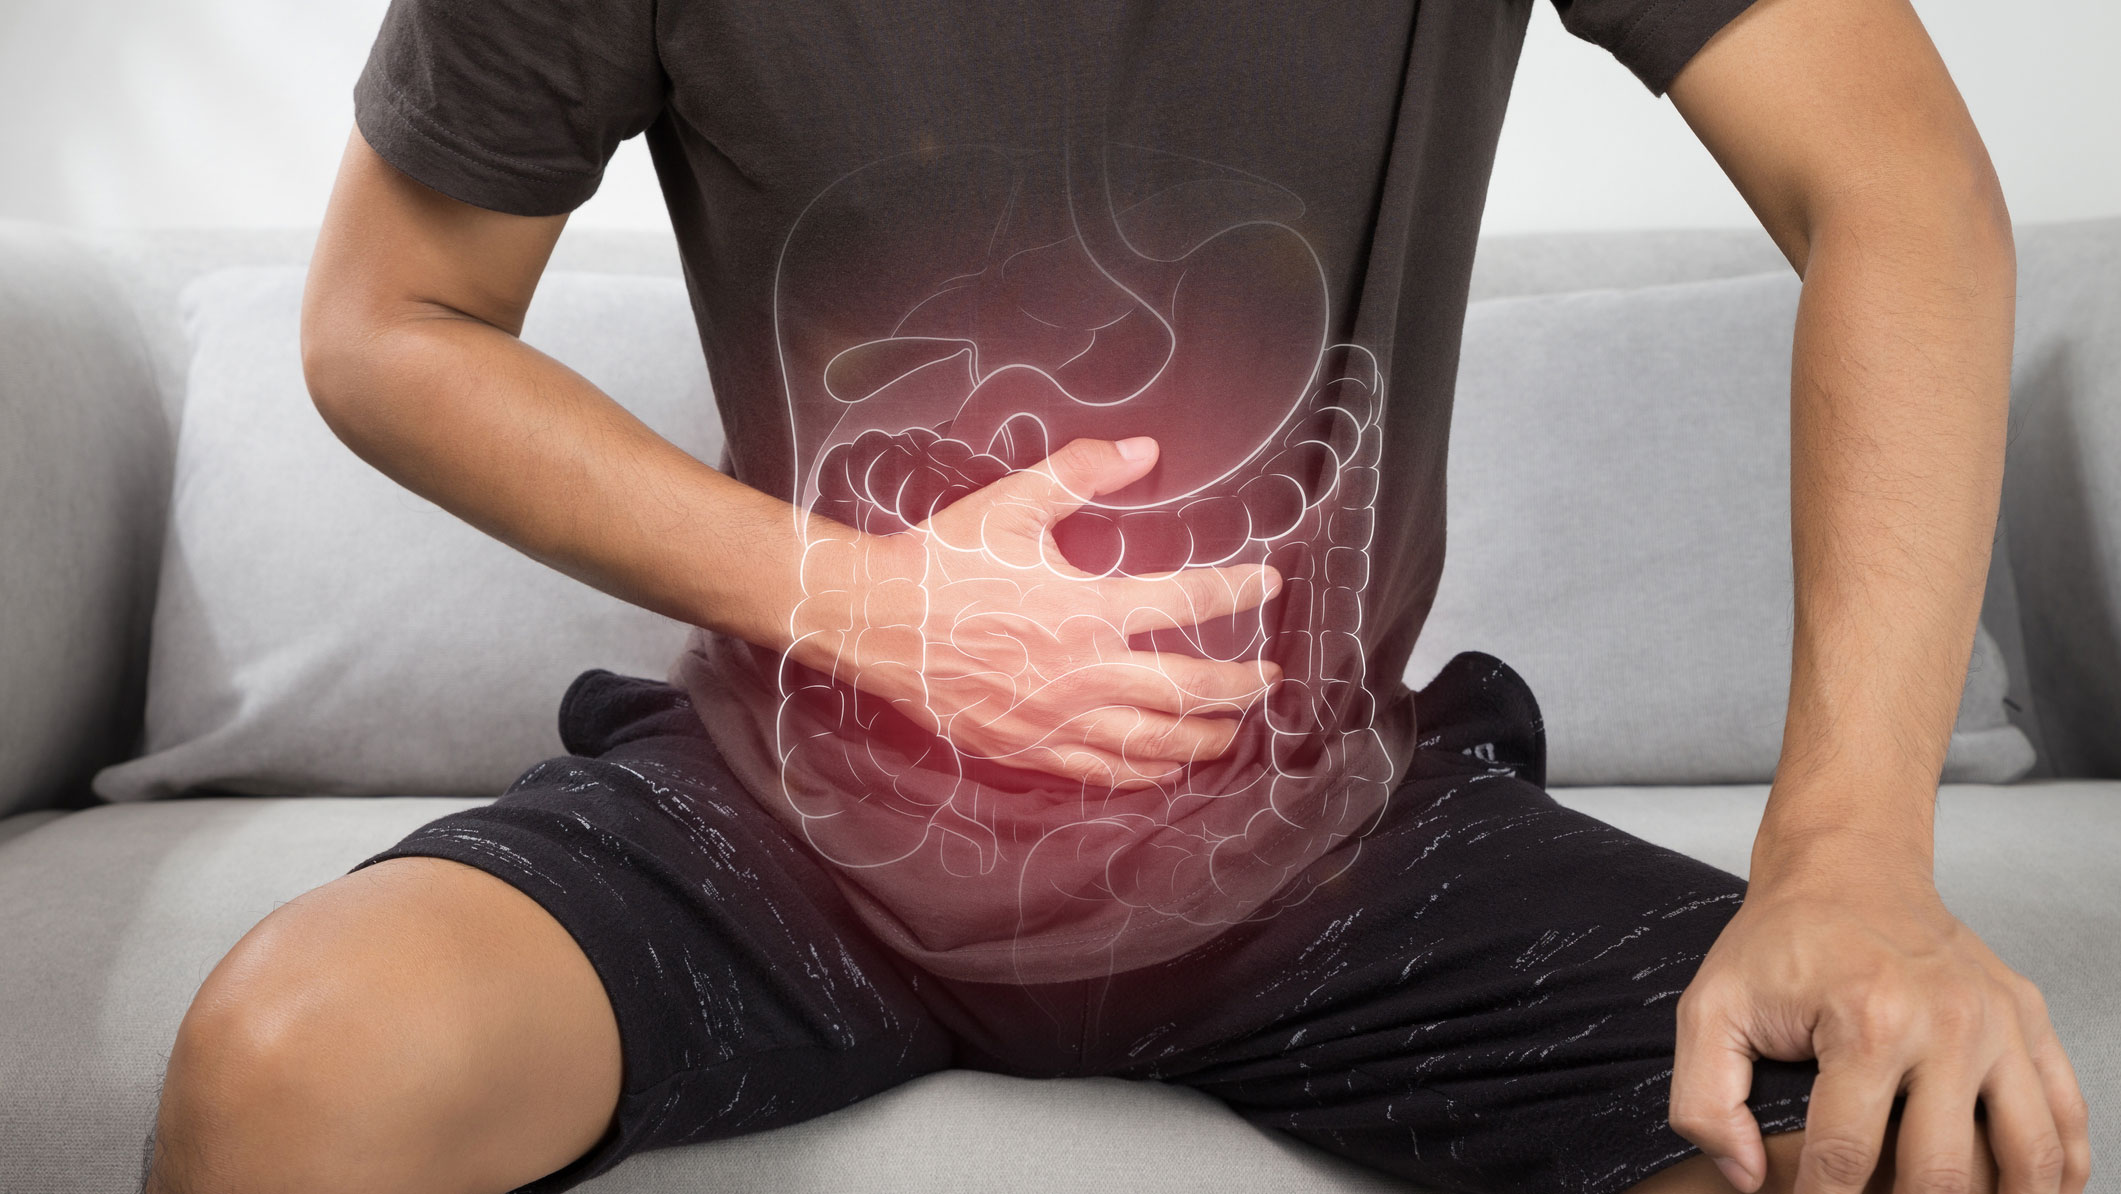 Photo of man grasping his abdominal area in pain with outline of colon superimposed on the area.